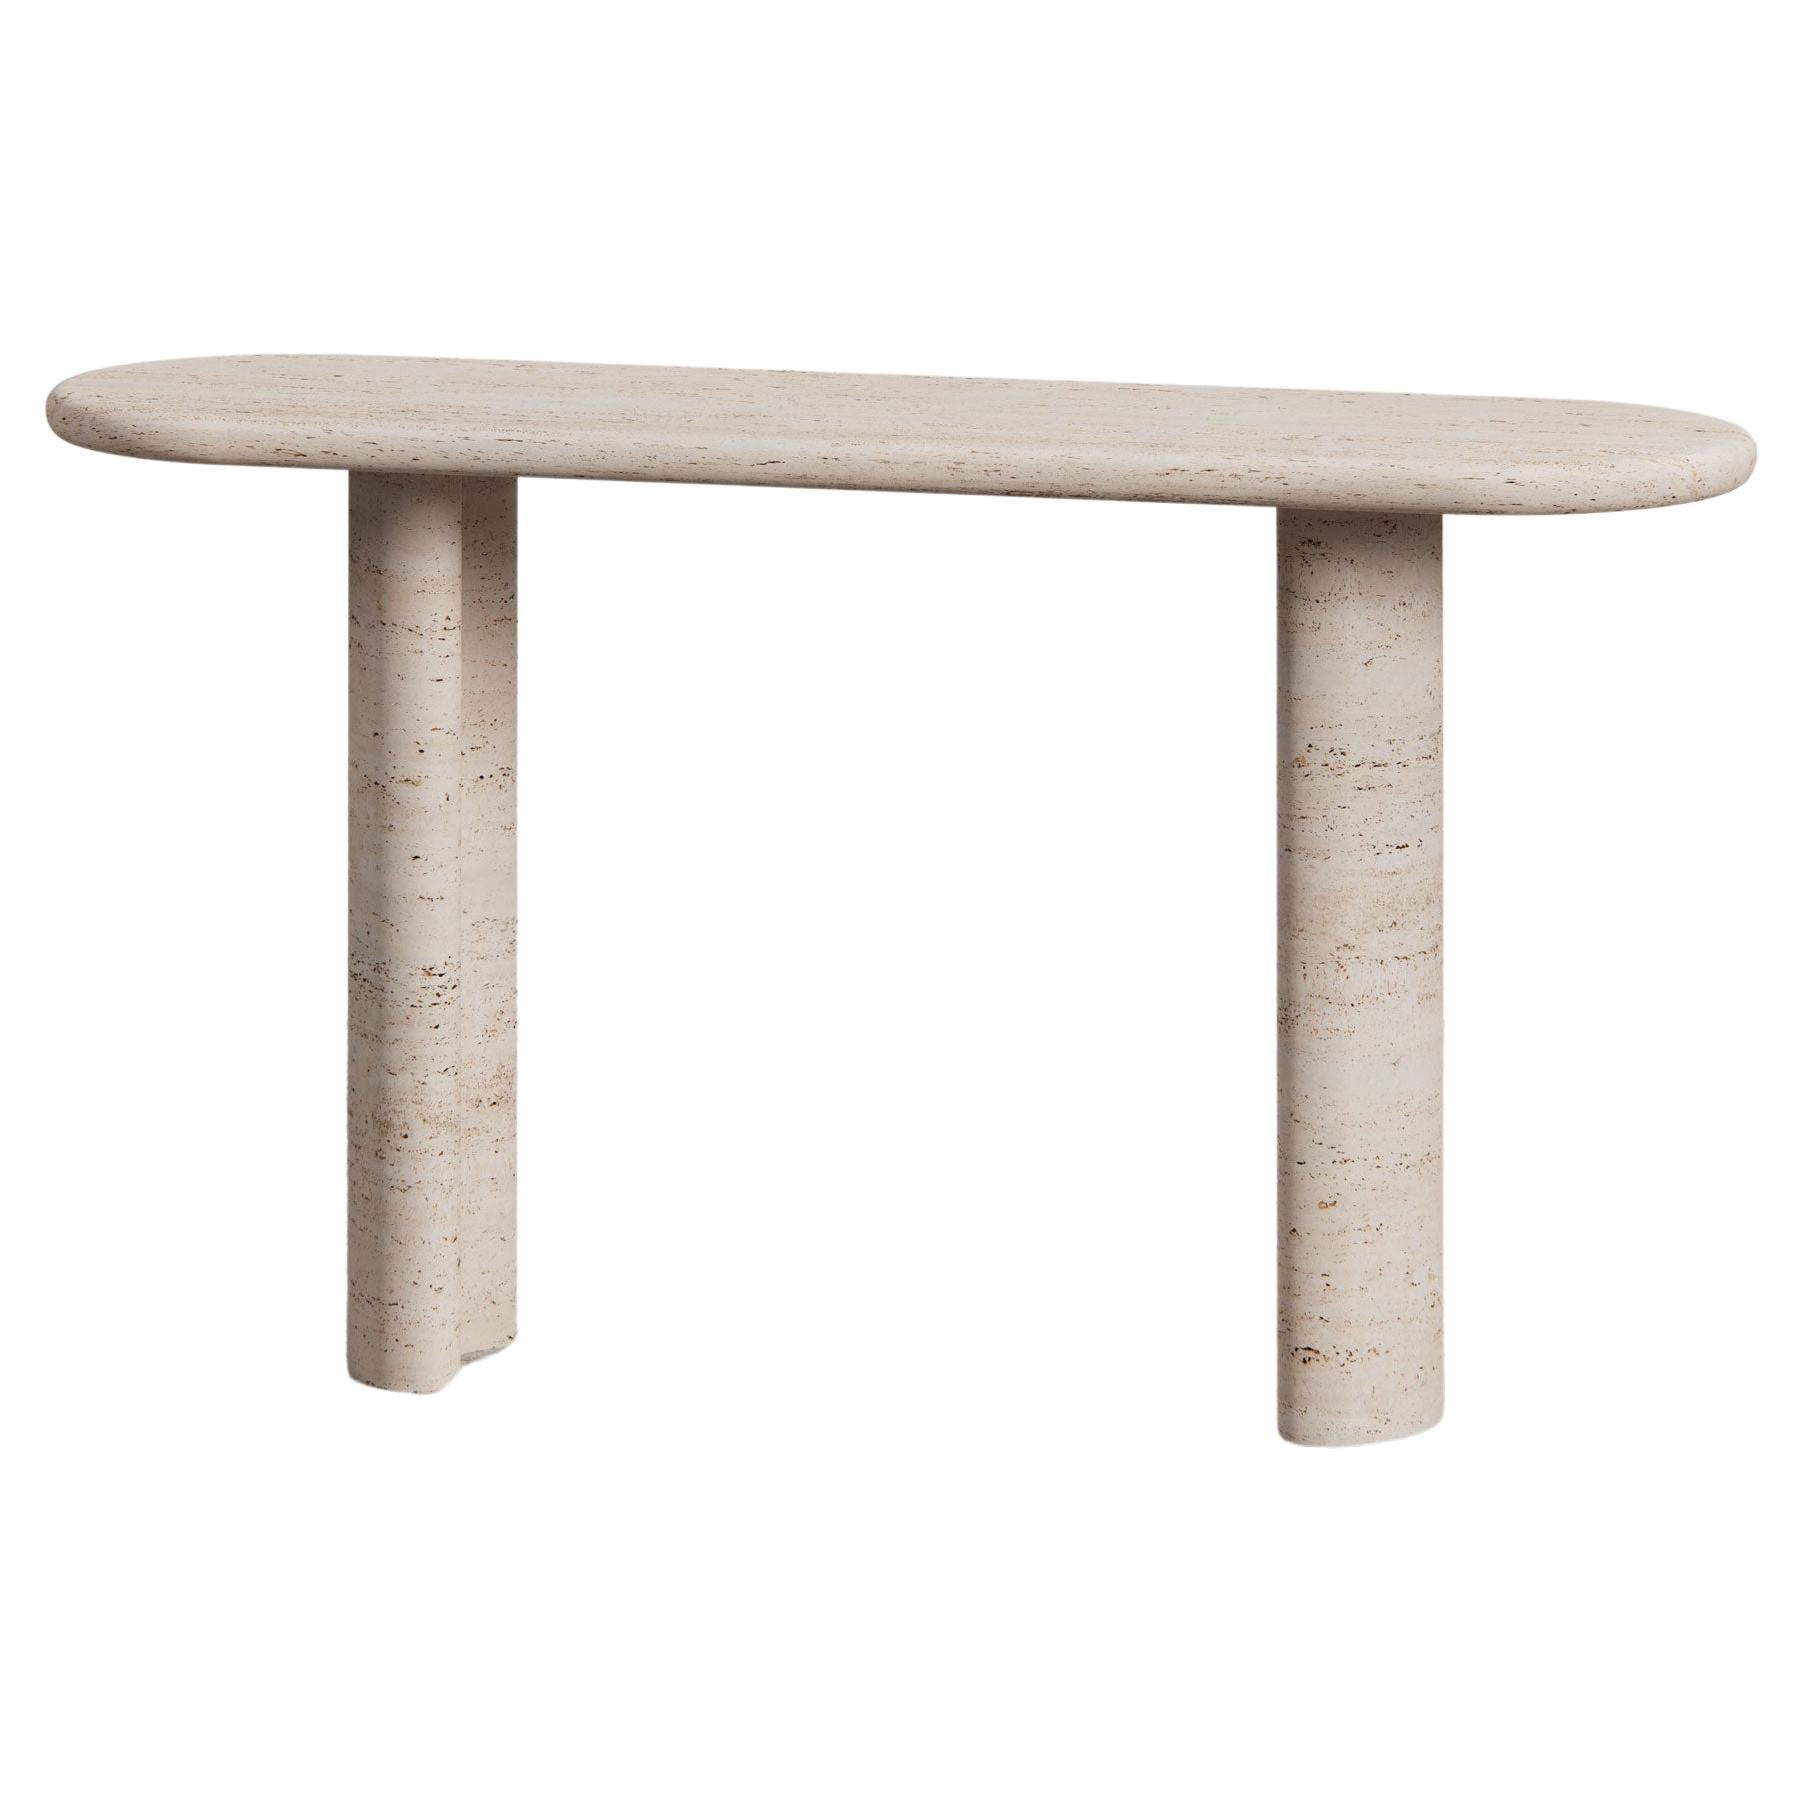 Pietra Console by Just Adele in Bianco Travertine